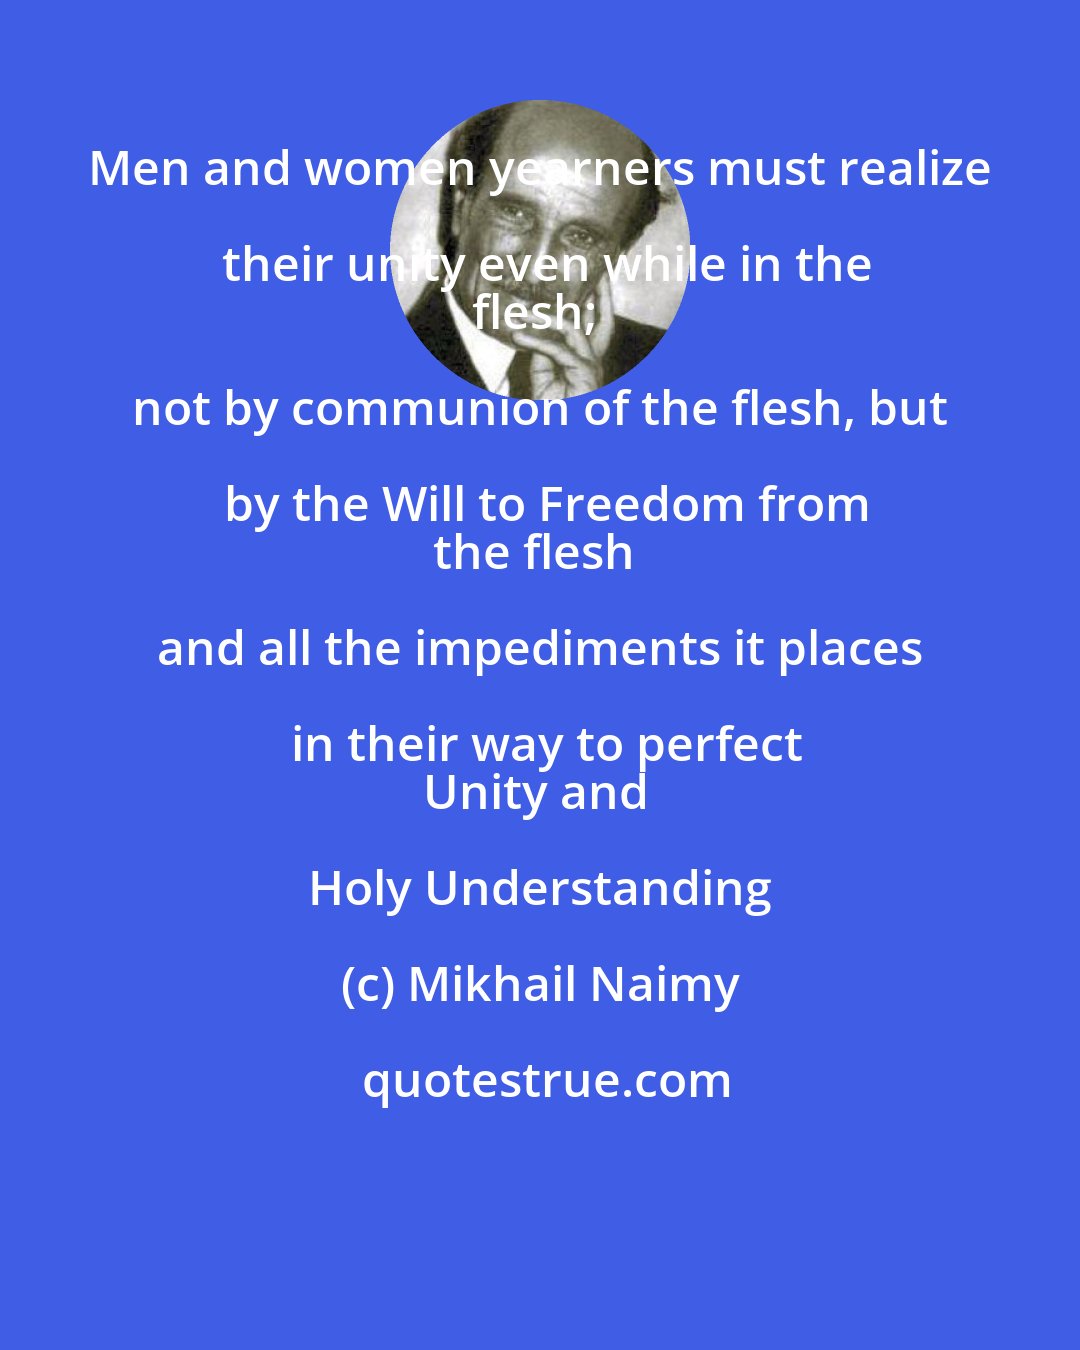 Mikhail Naimy: Men and women yearners must realize their unity even while in the
flesh; not by communion of the flesh, but by the Will to Freedom from
the flesh and all the impediments it places in their way to perfect
Unity and Holy Understanding